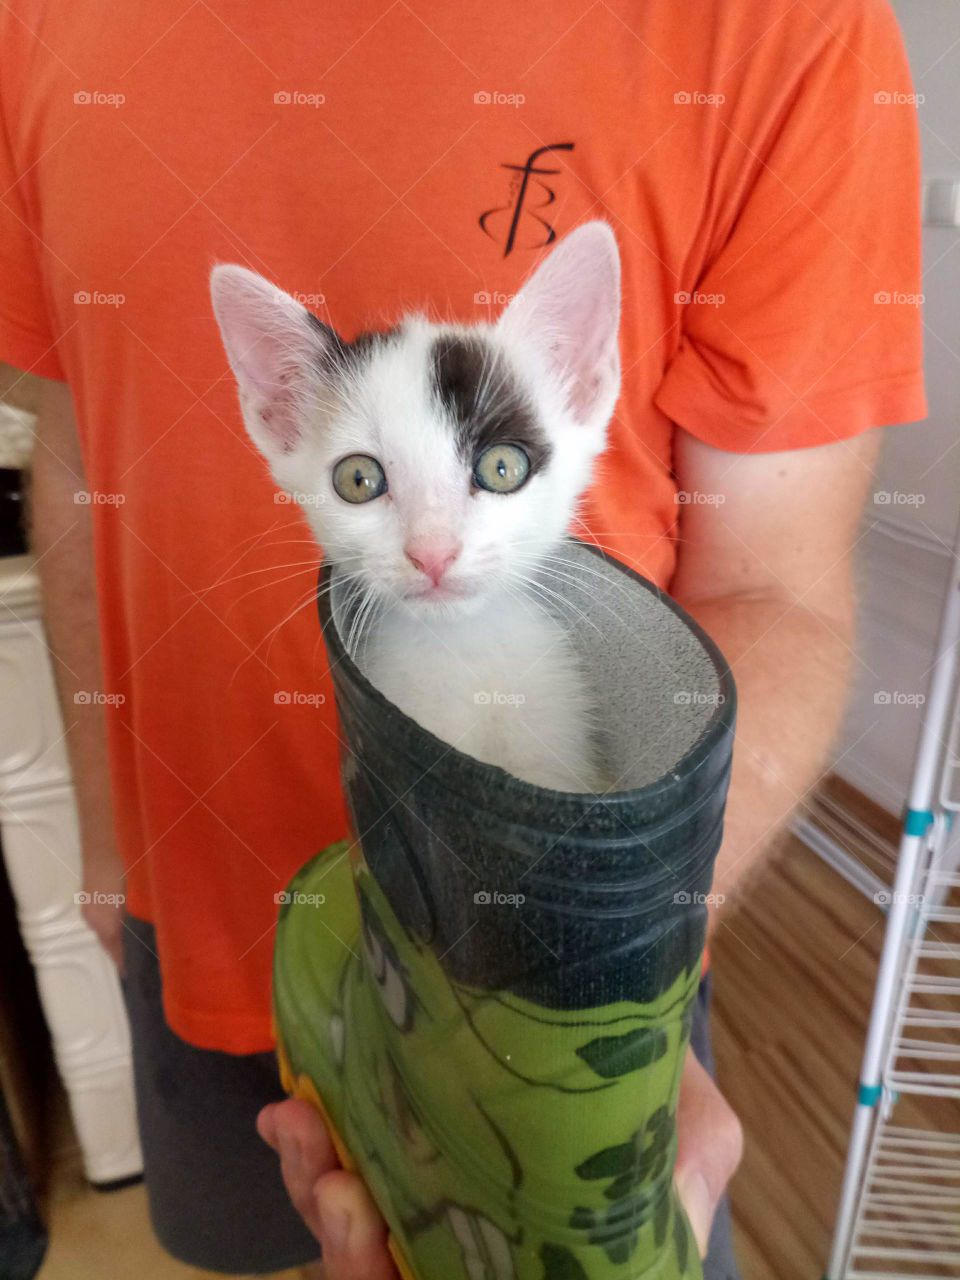 Suprised cat in the green boot